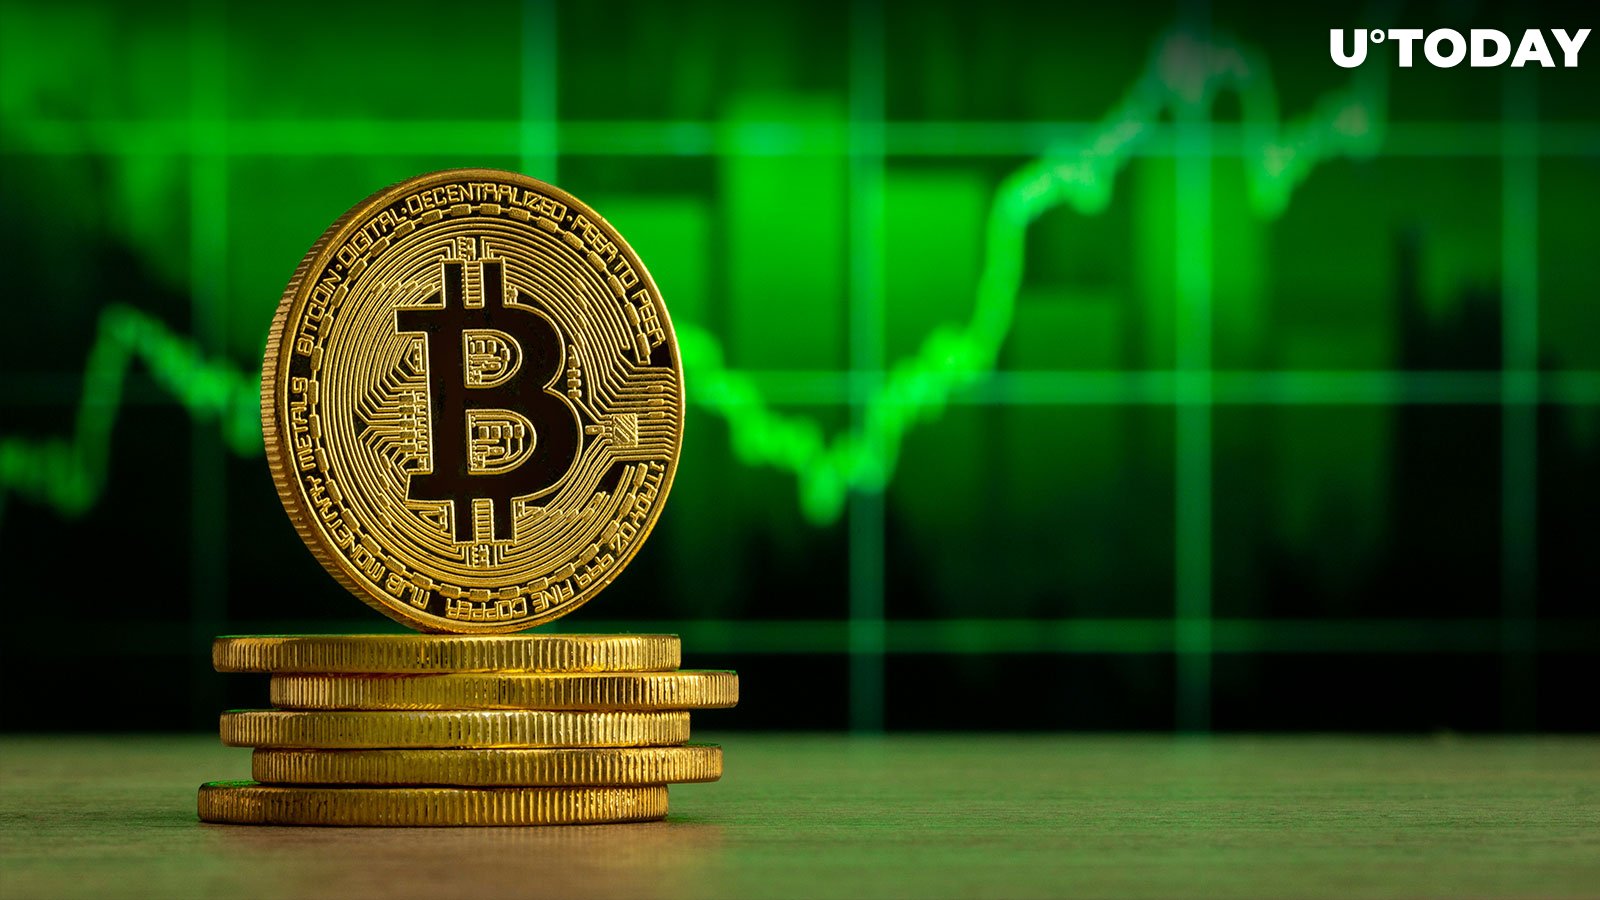 Bitcoin (BTC) Reacts to Latest Fed Rate Decision